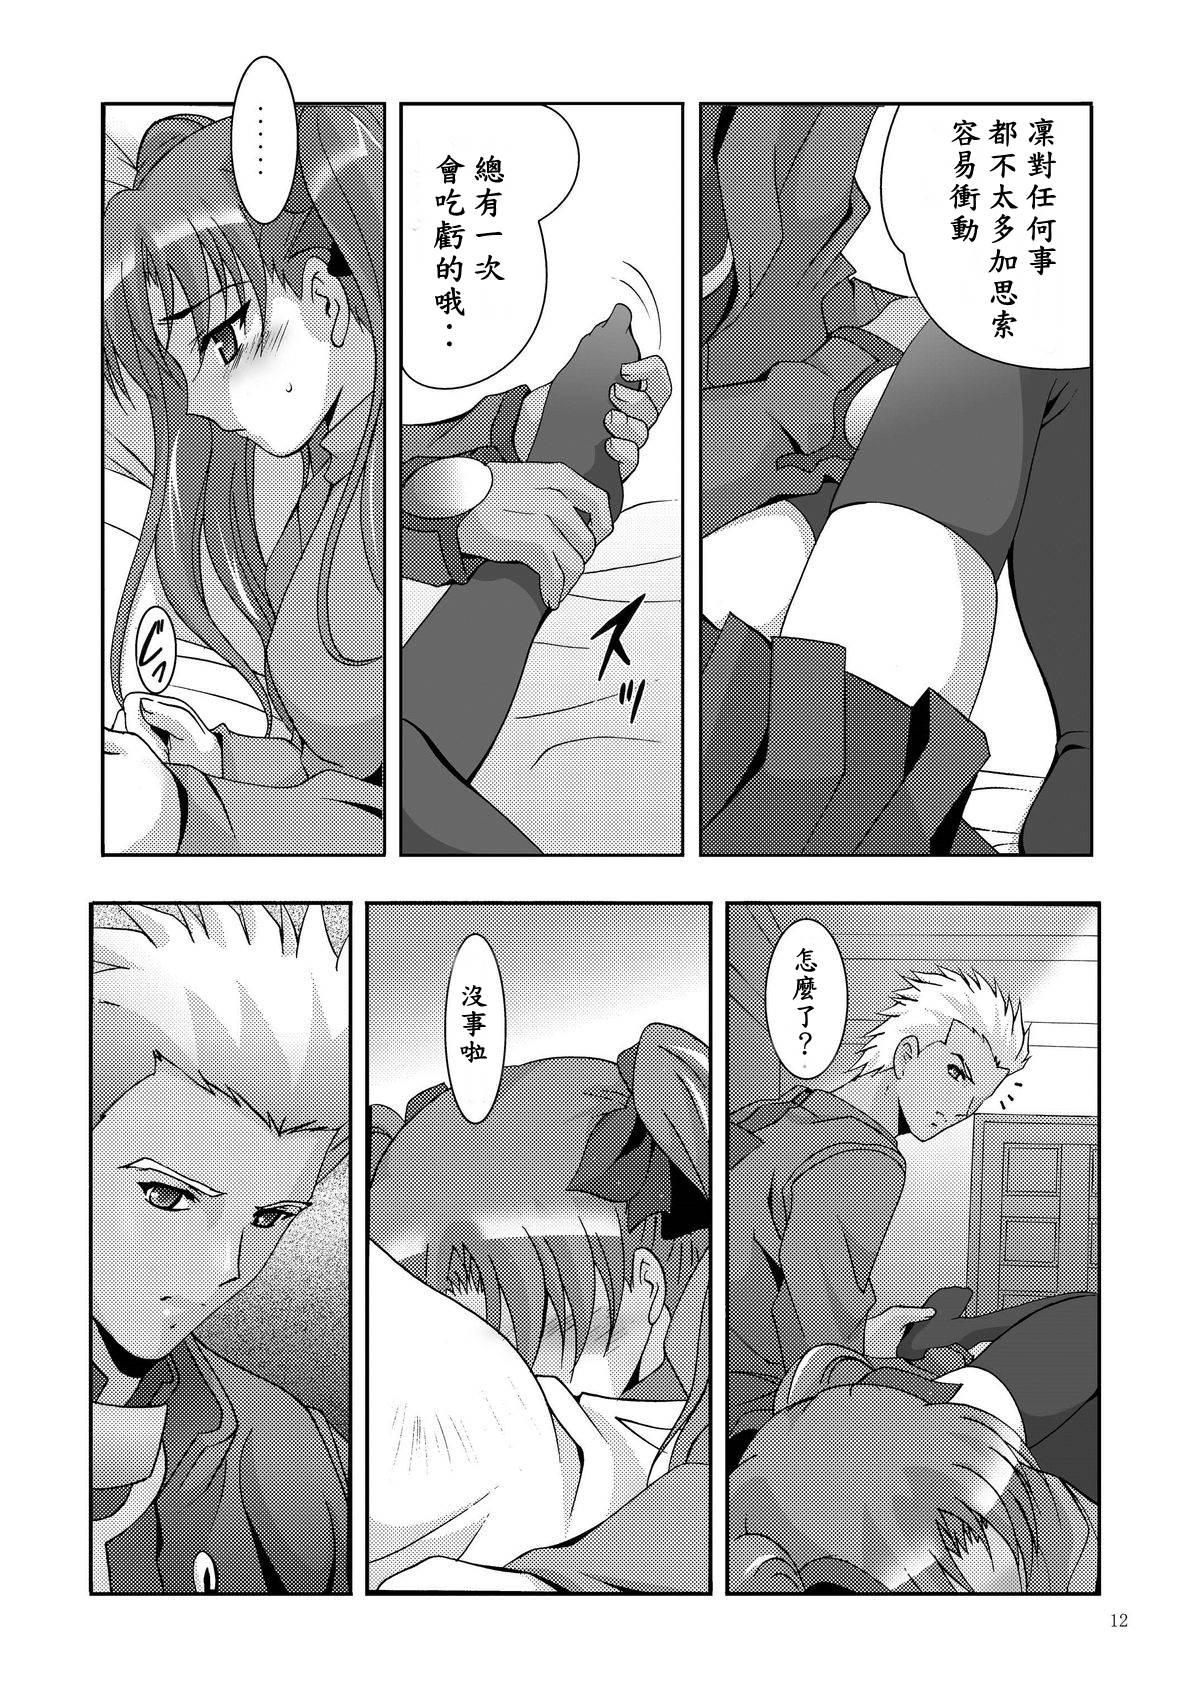 Hungarian MOUSOU THEATER 19 - Fate stay night Rough Sex - Page 10